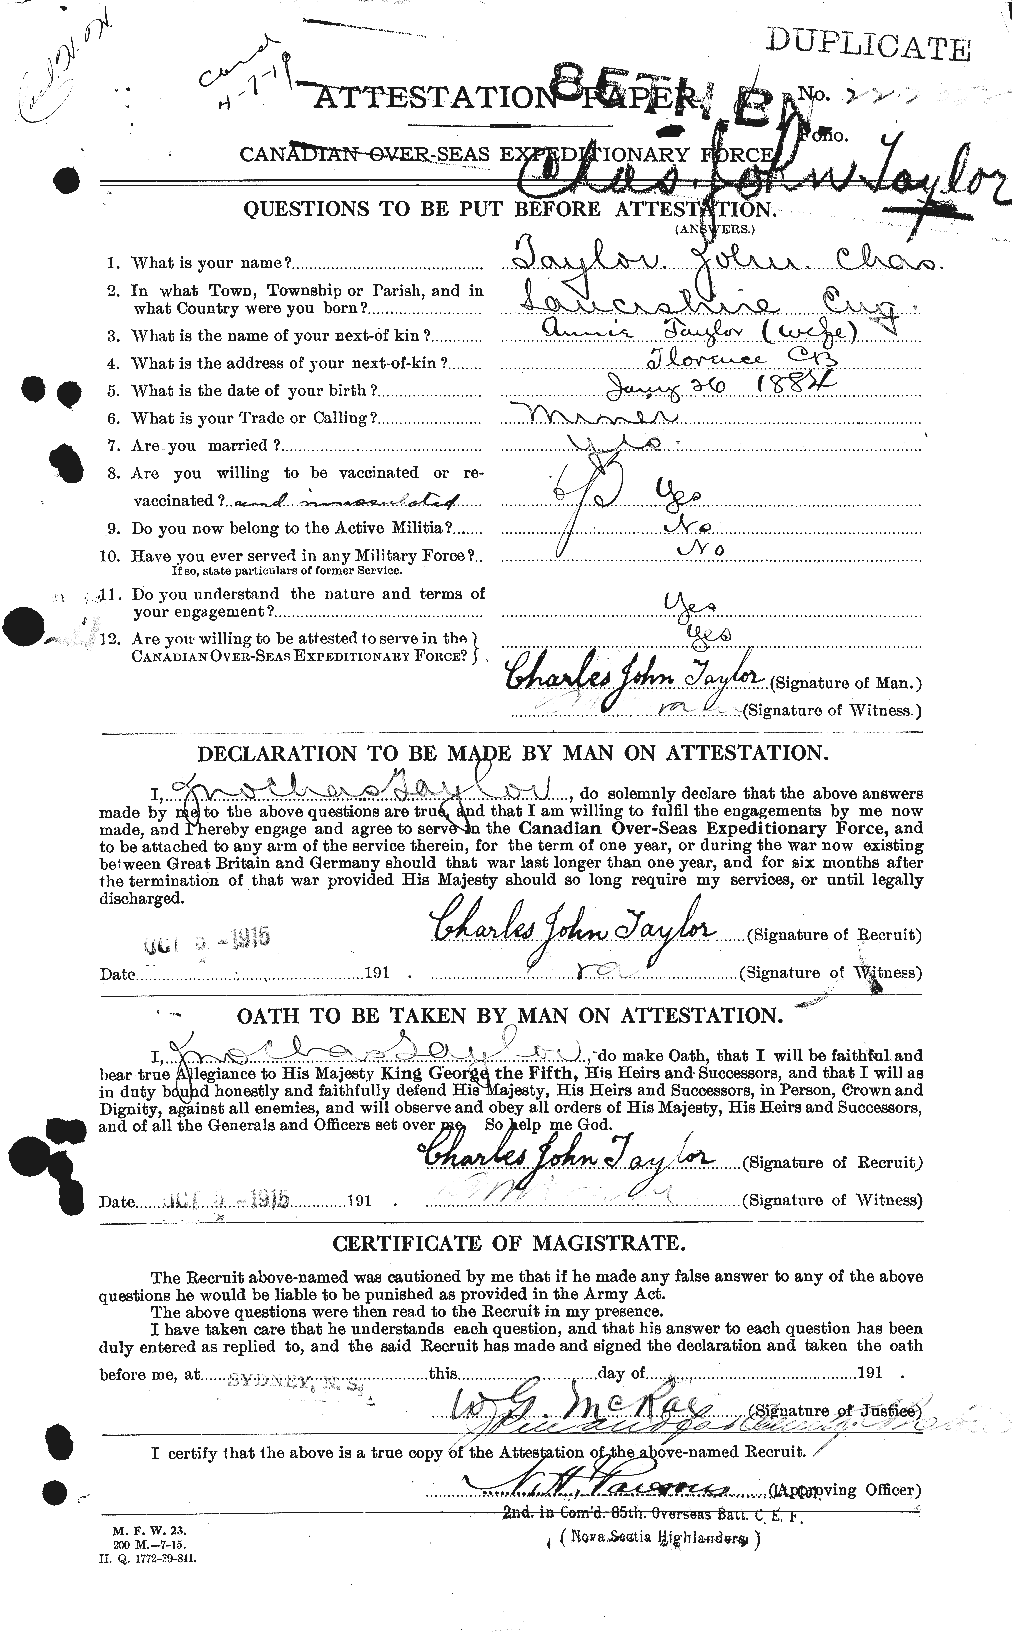 Personnel Records of the First World War - CEF 627057a